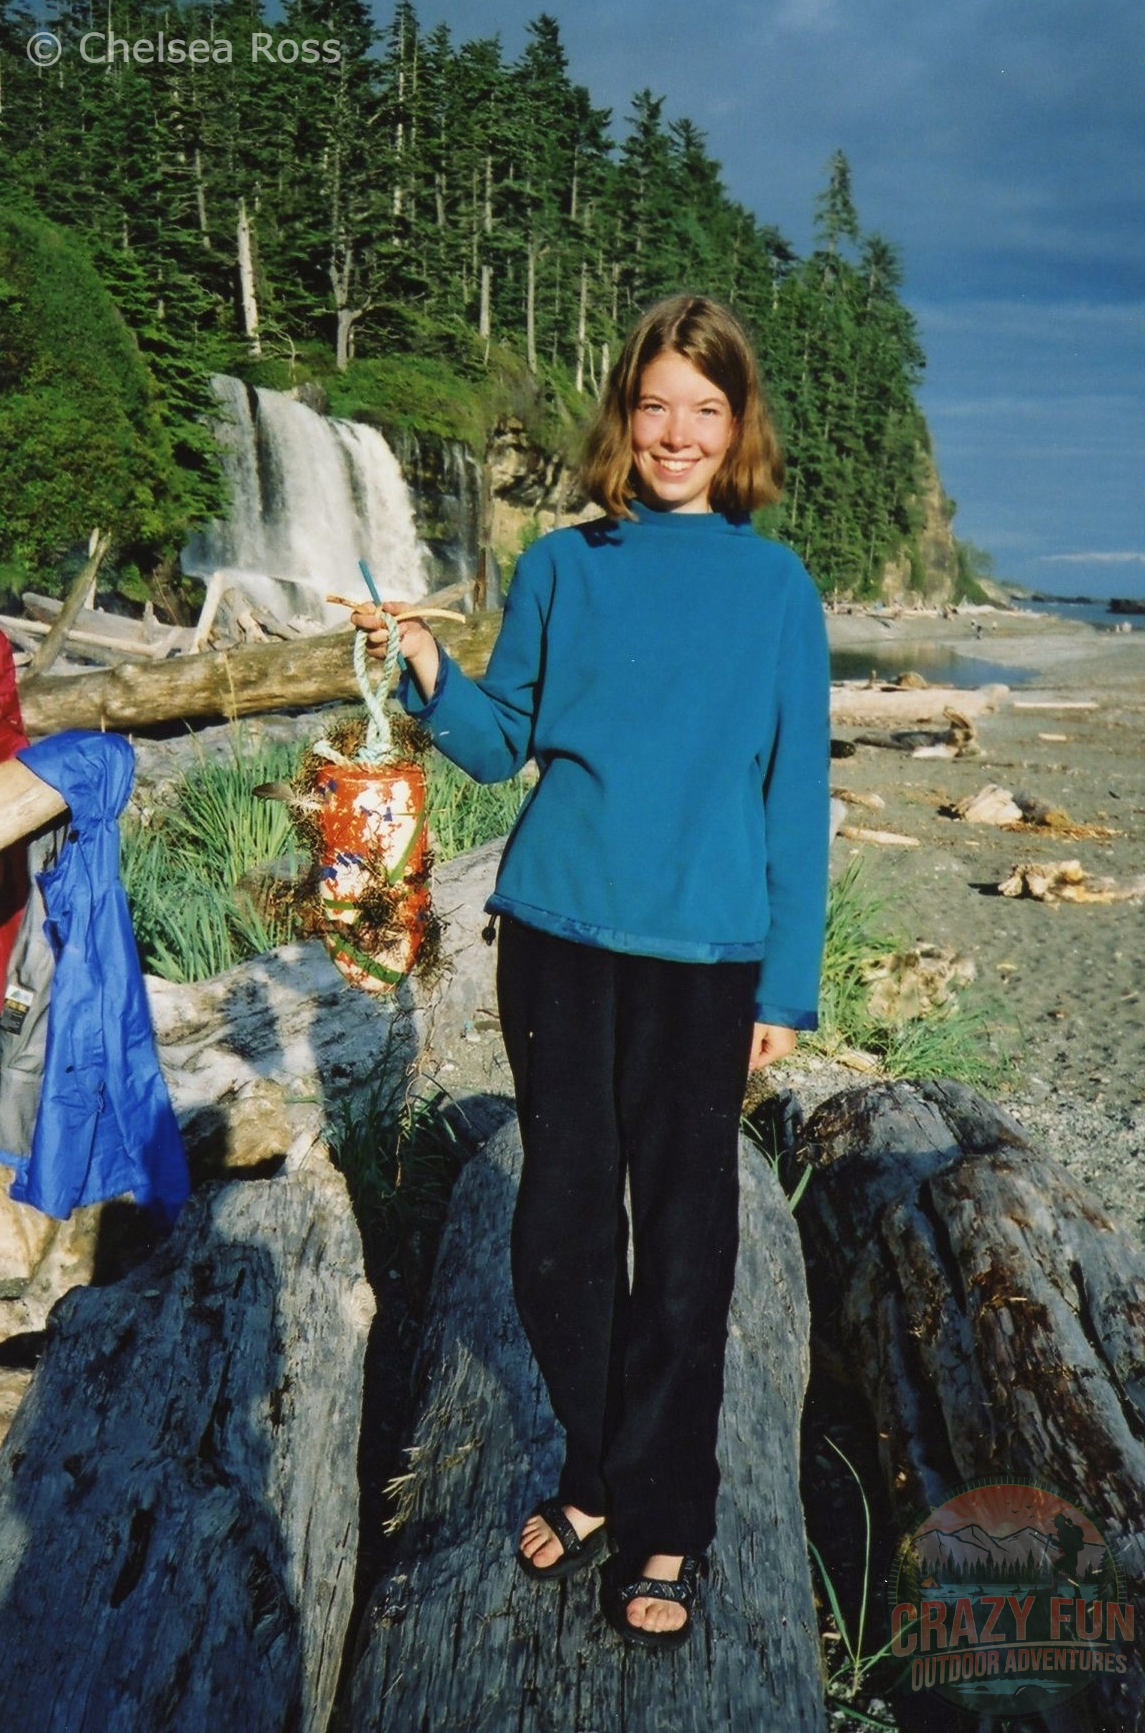 Girl standing in front of falls with decorated buoy